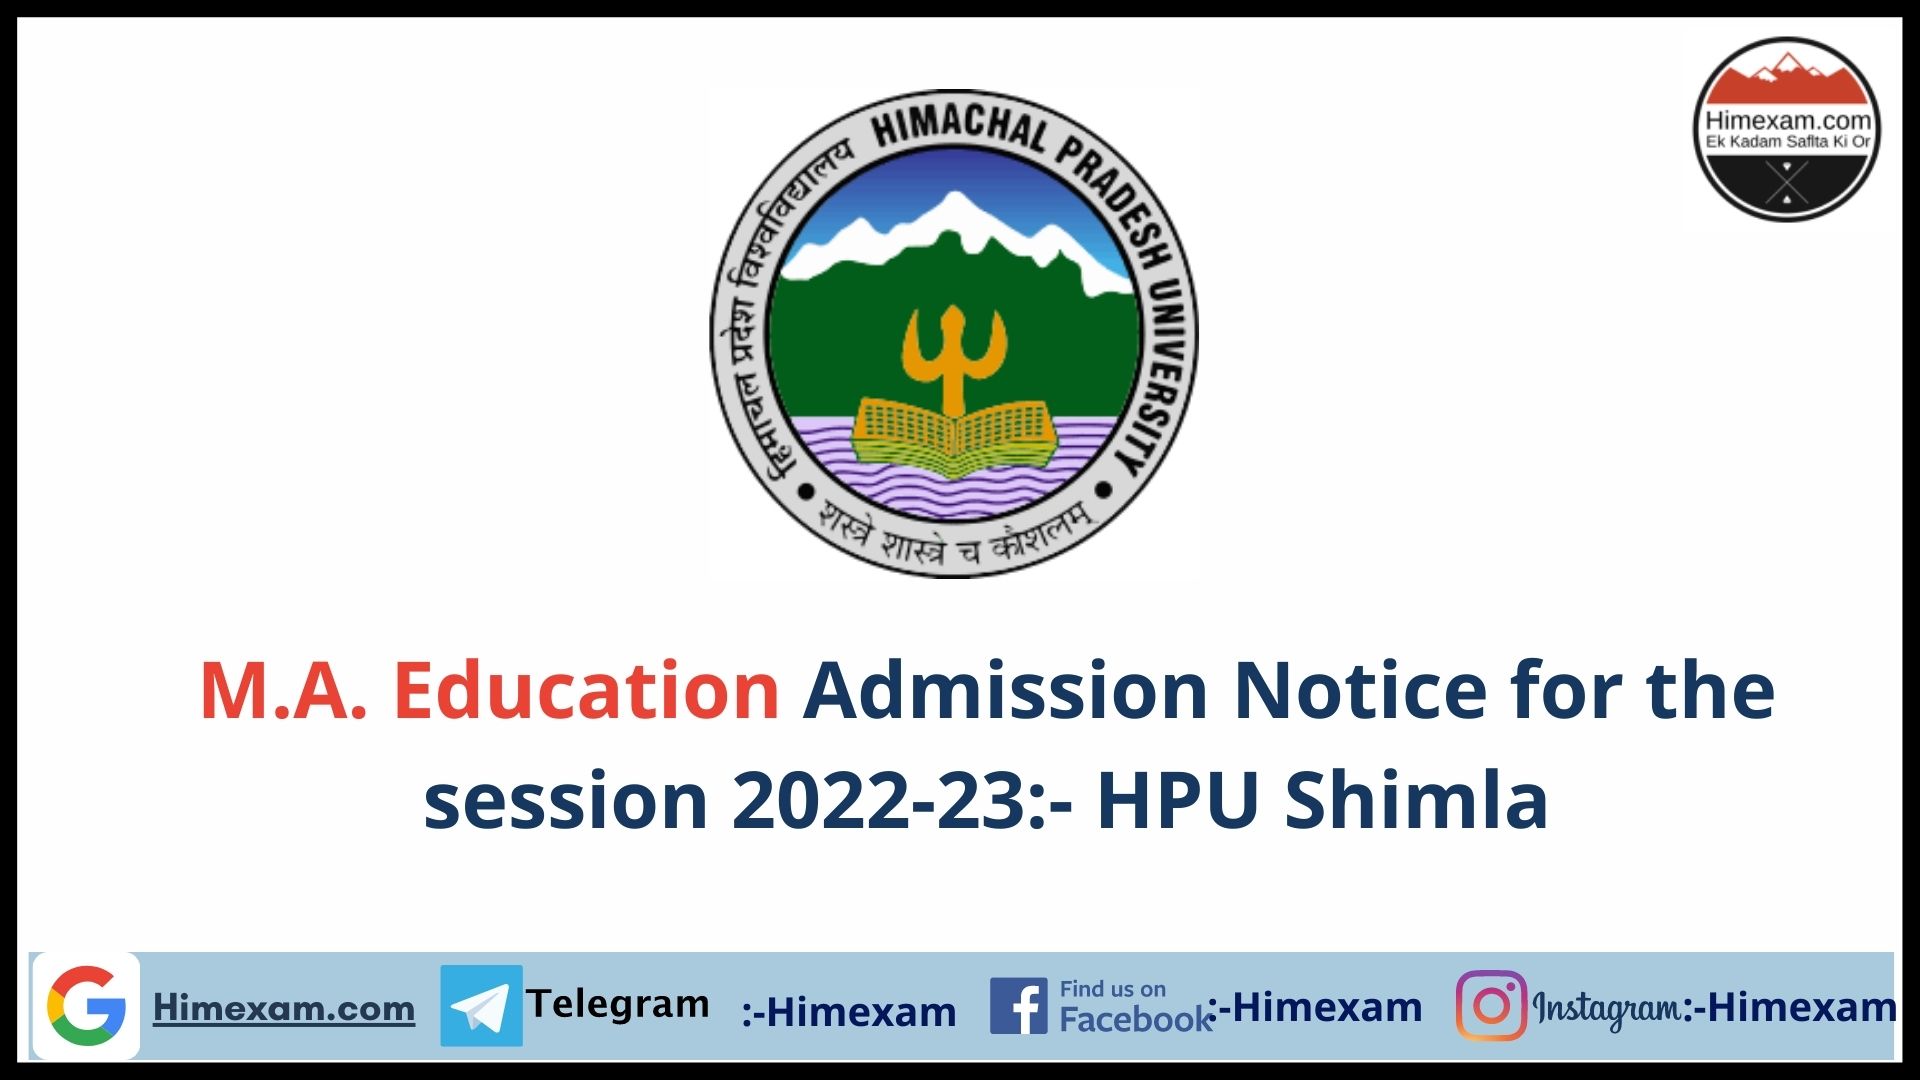 M.A. Education Admission Notice for the session 2022-23:- HPU Shimla